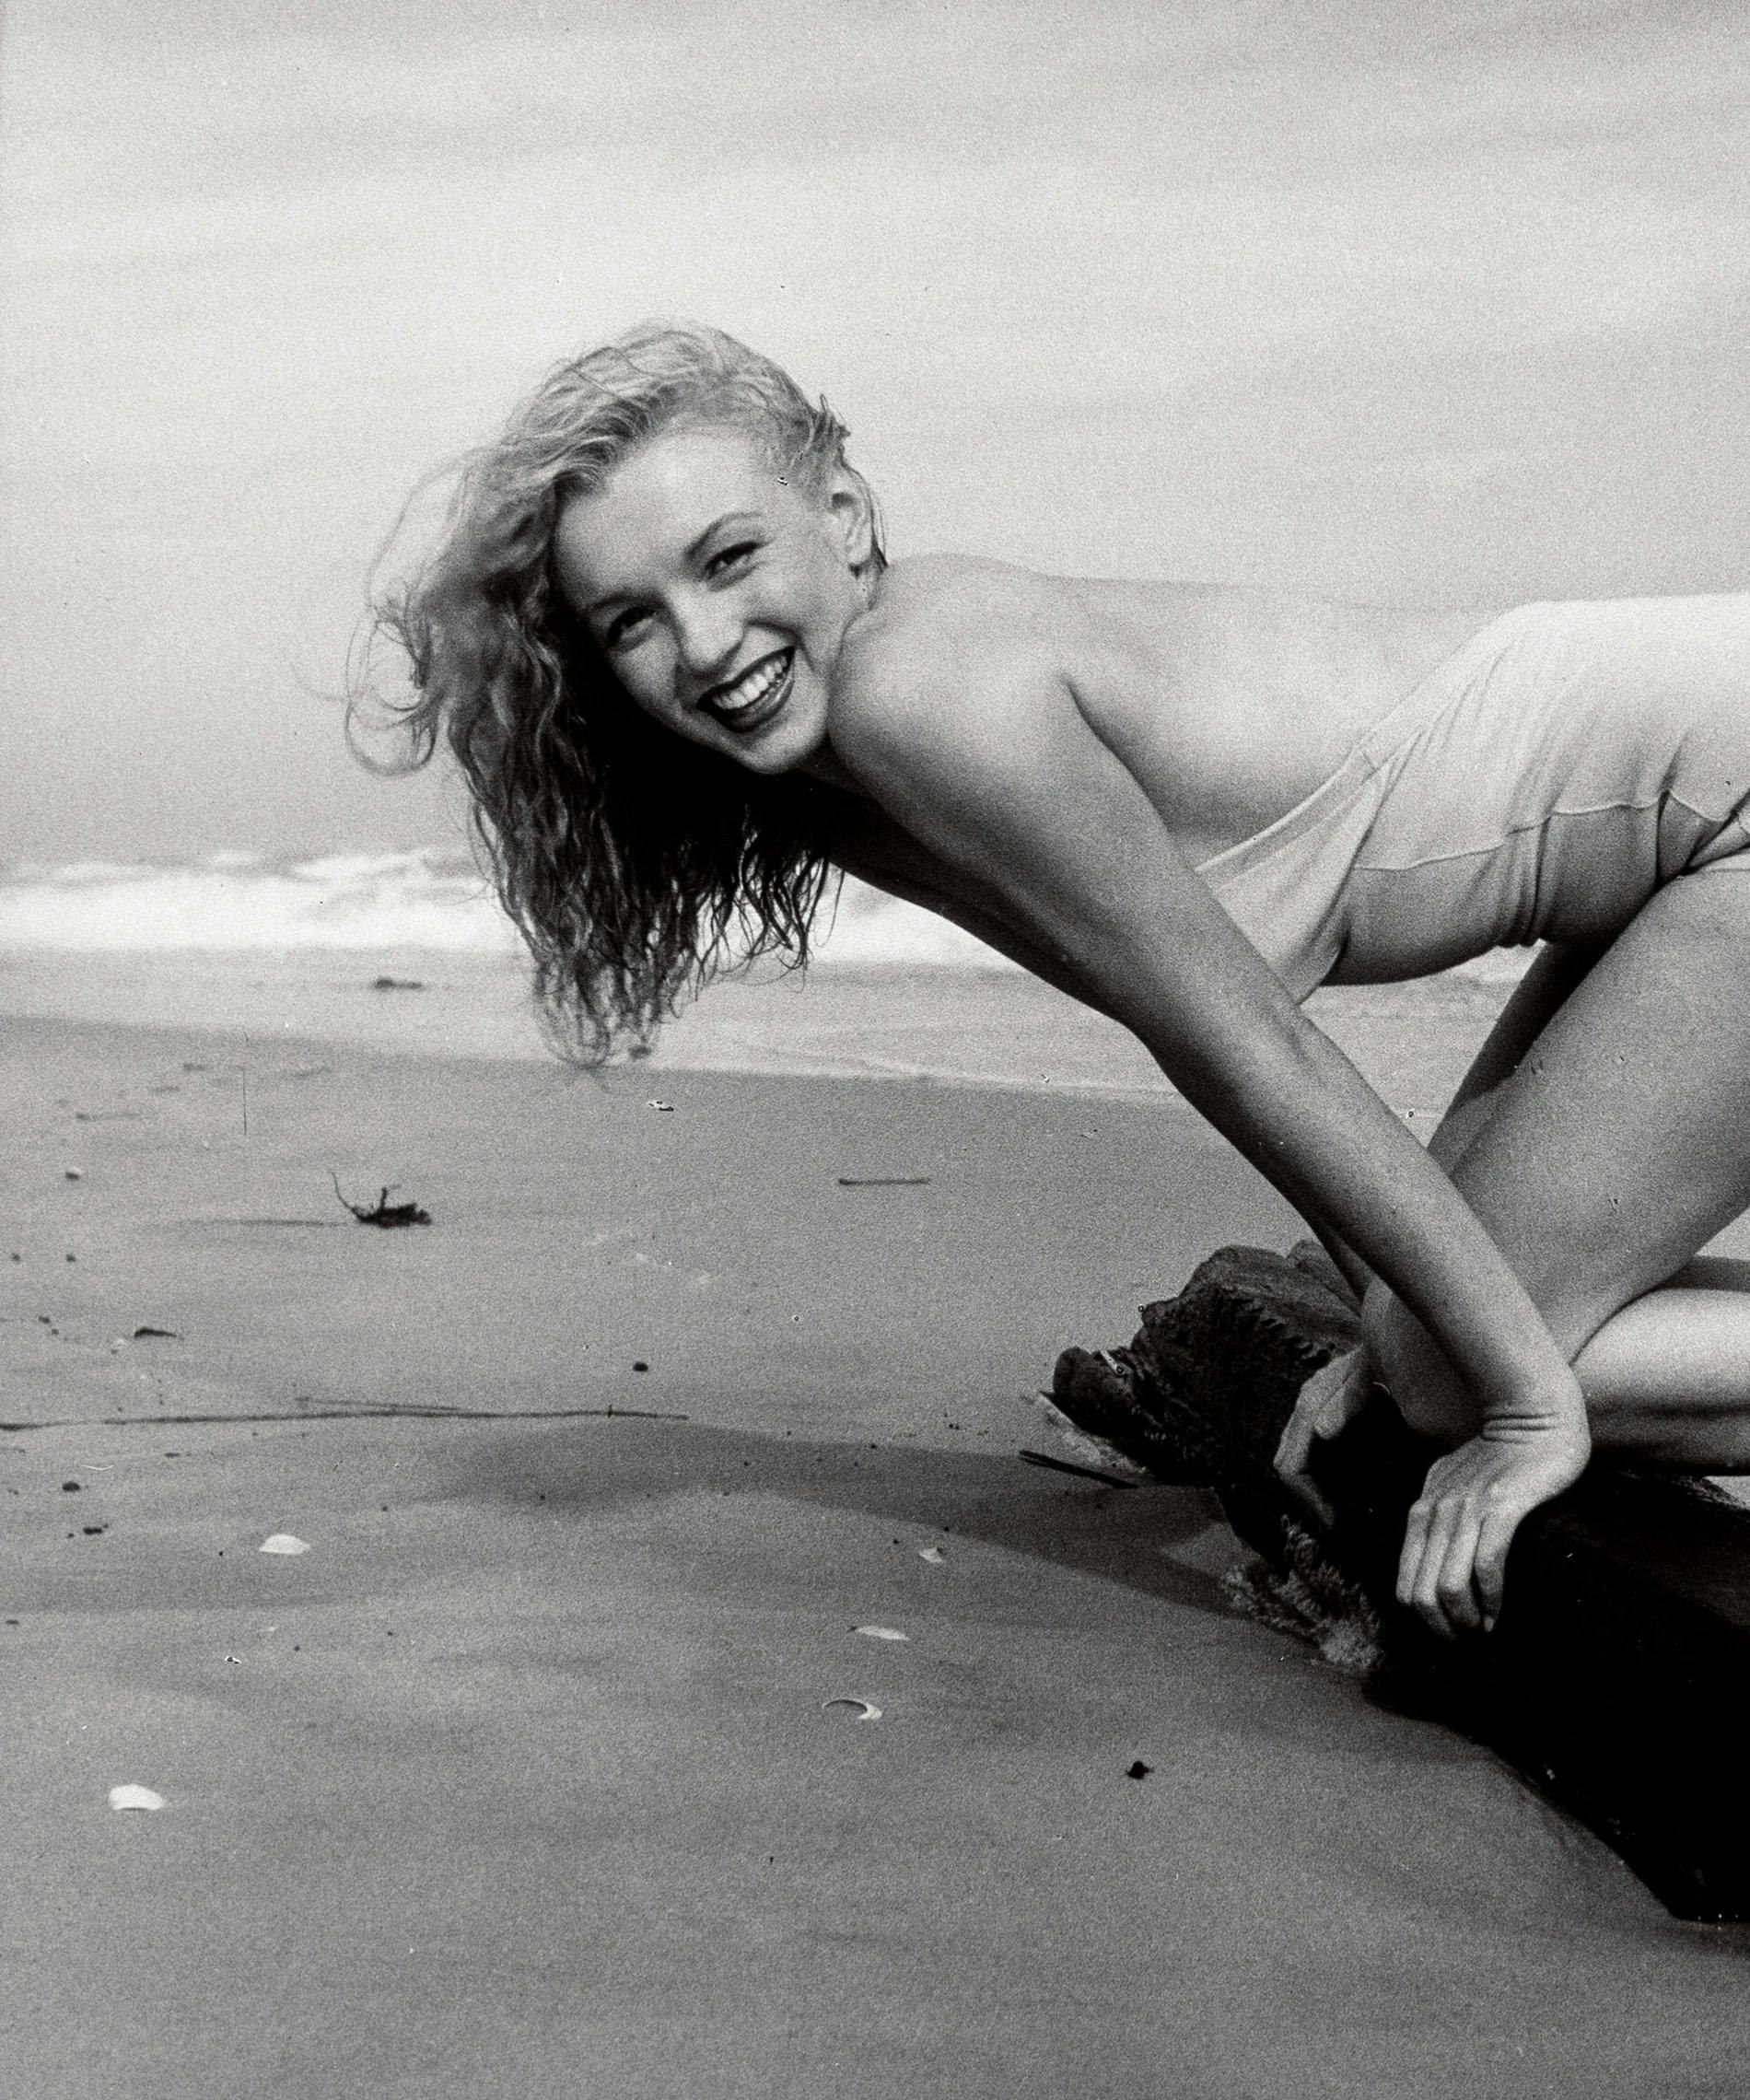 How Did We Go From Curvy Marilyn Monroe To Stick-Thin IG Models?